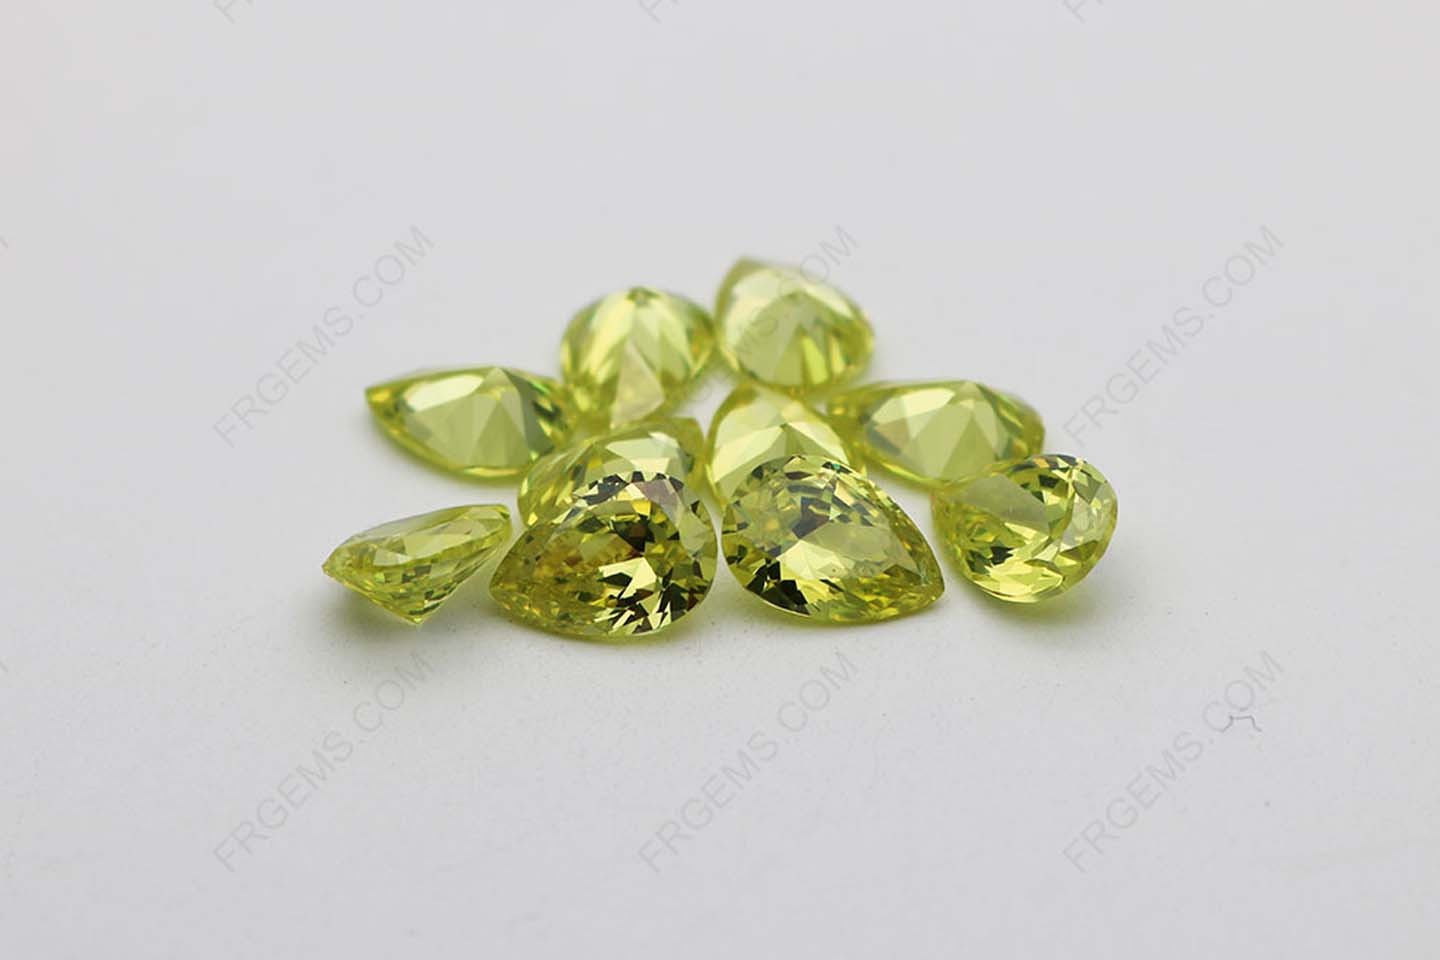 Cubic Zirconia Apple green Yellowish Pear Shape faceted cut 10x7mm stones CZ41 IMG_1800